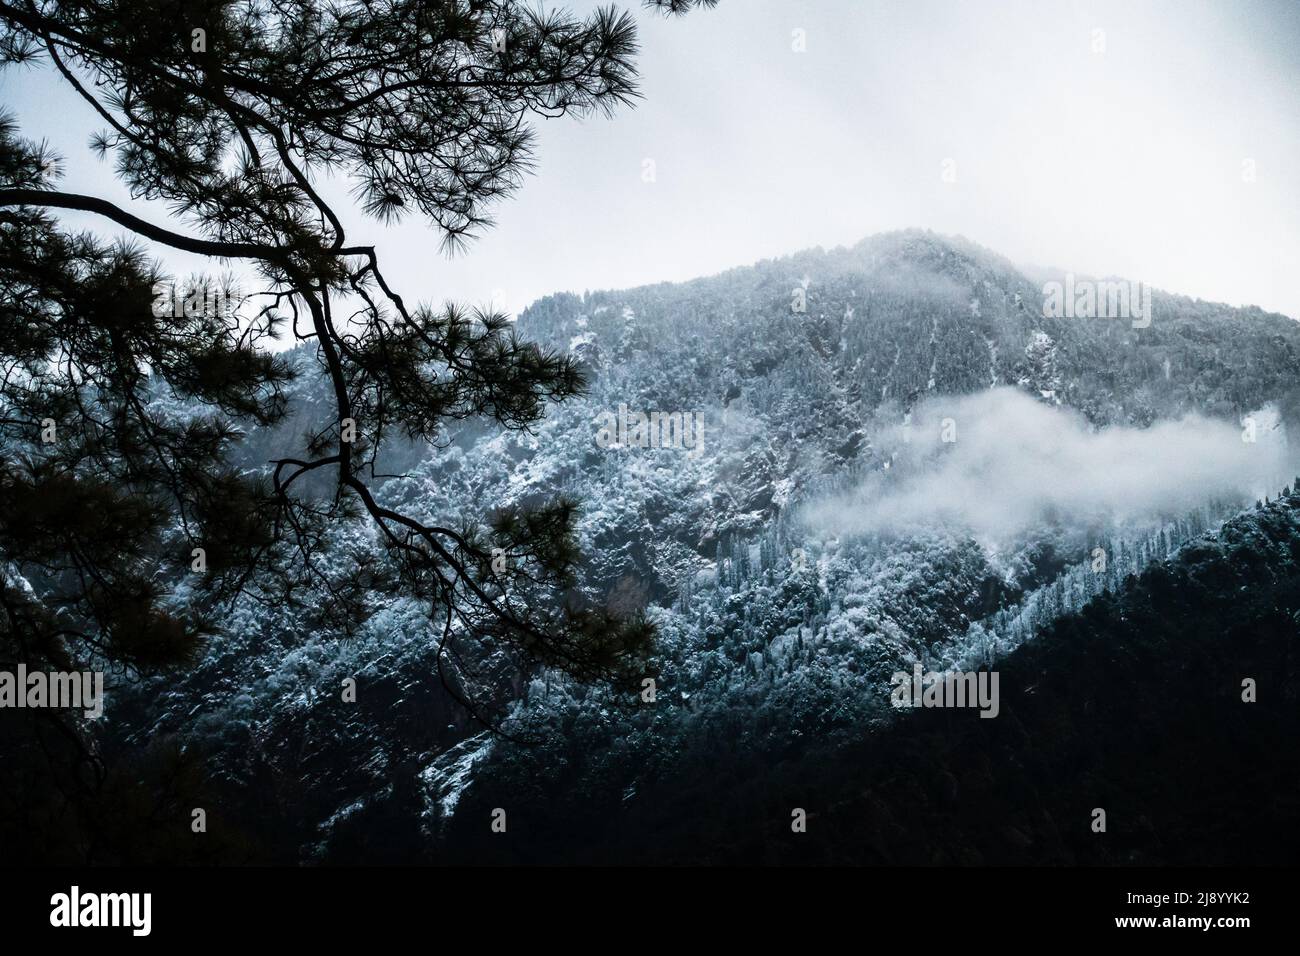 A beautiful shot of Snow covered mountains in the Okhimath district of Chamoli garhwal, Uttrakhand. India. Stock Photo